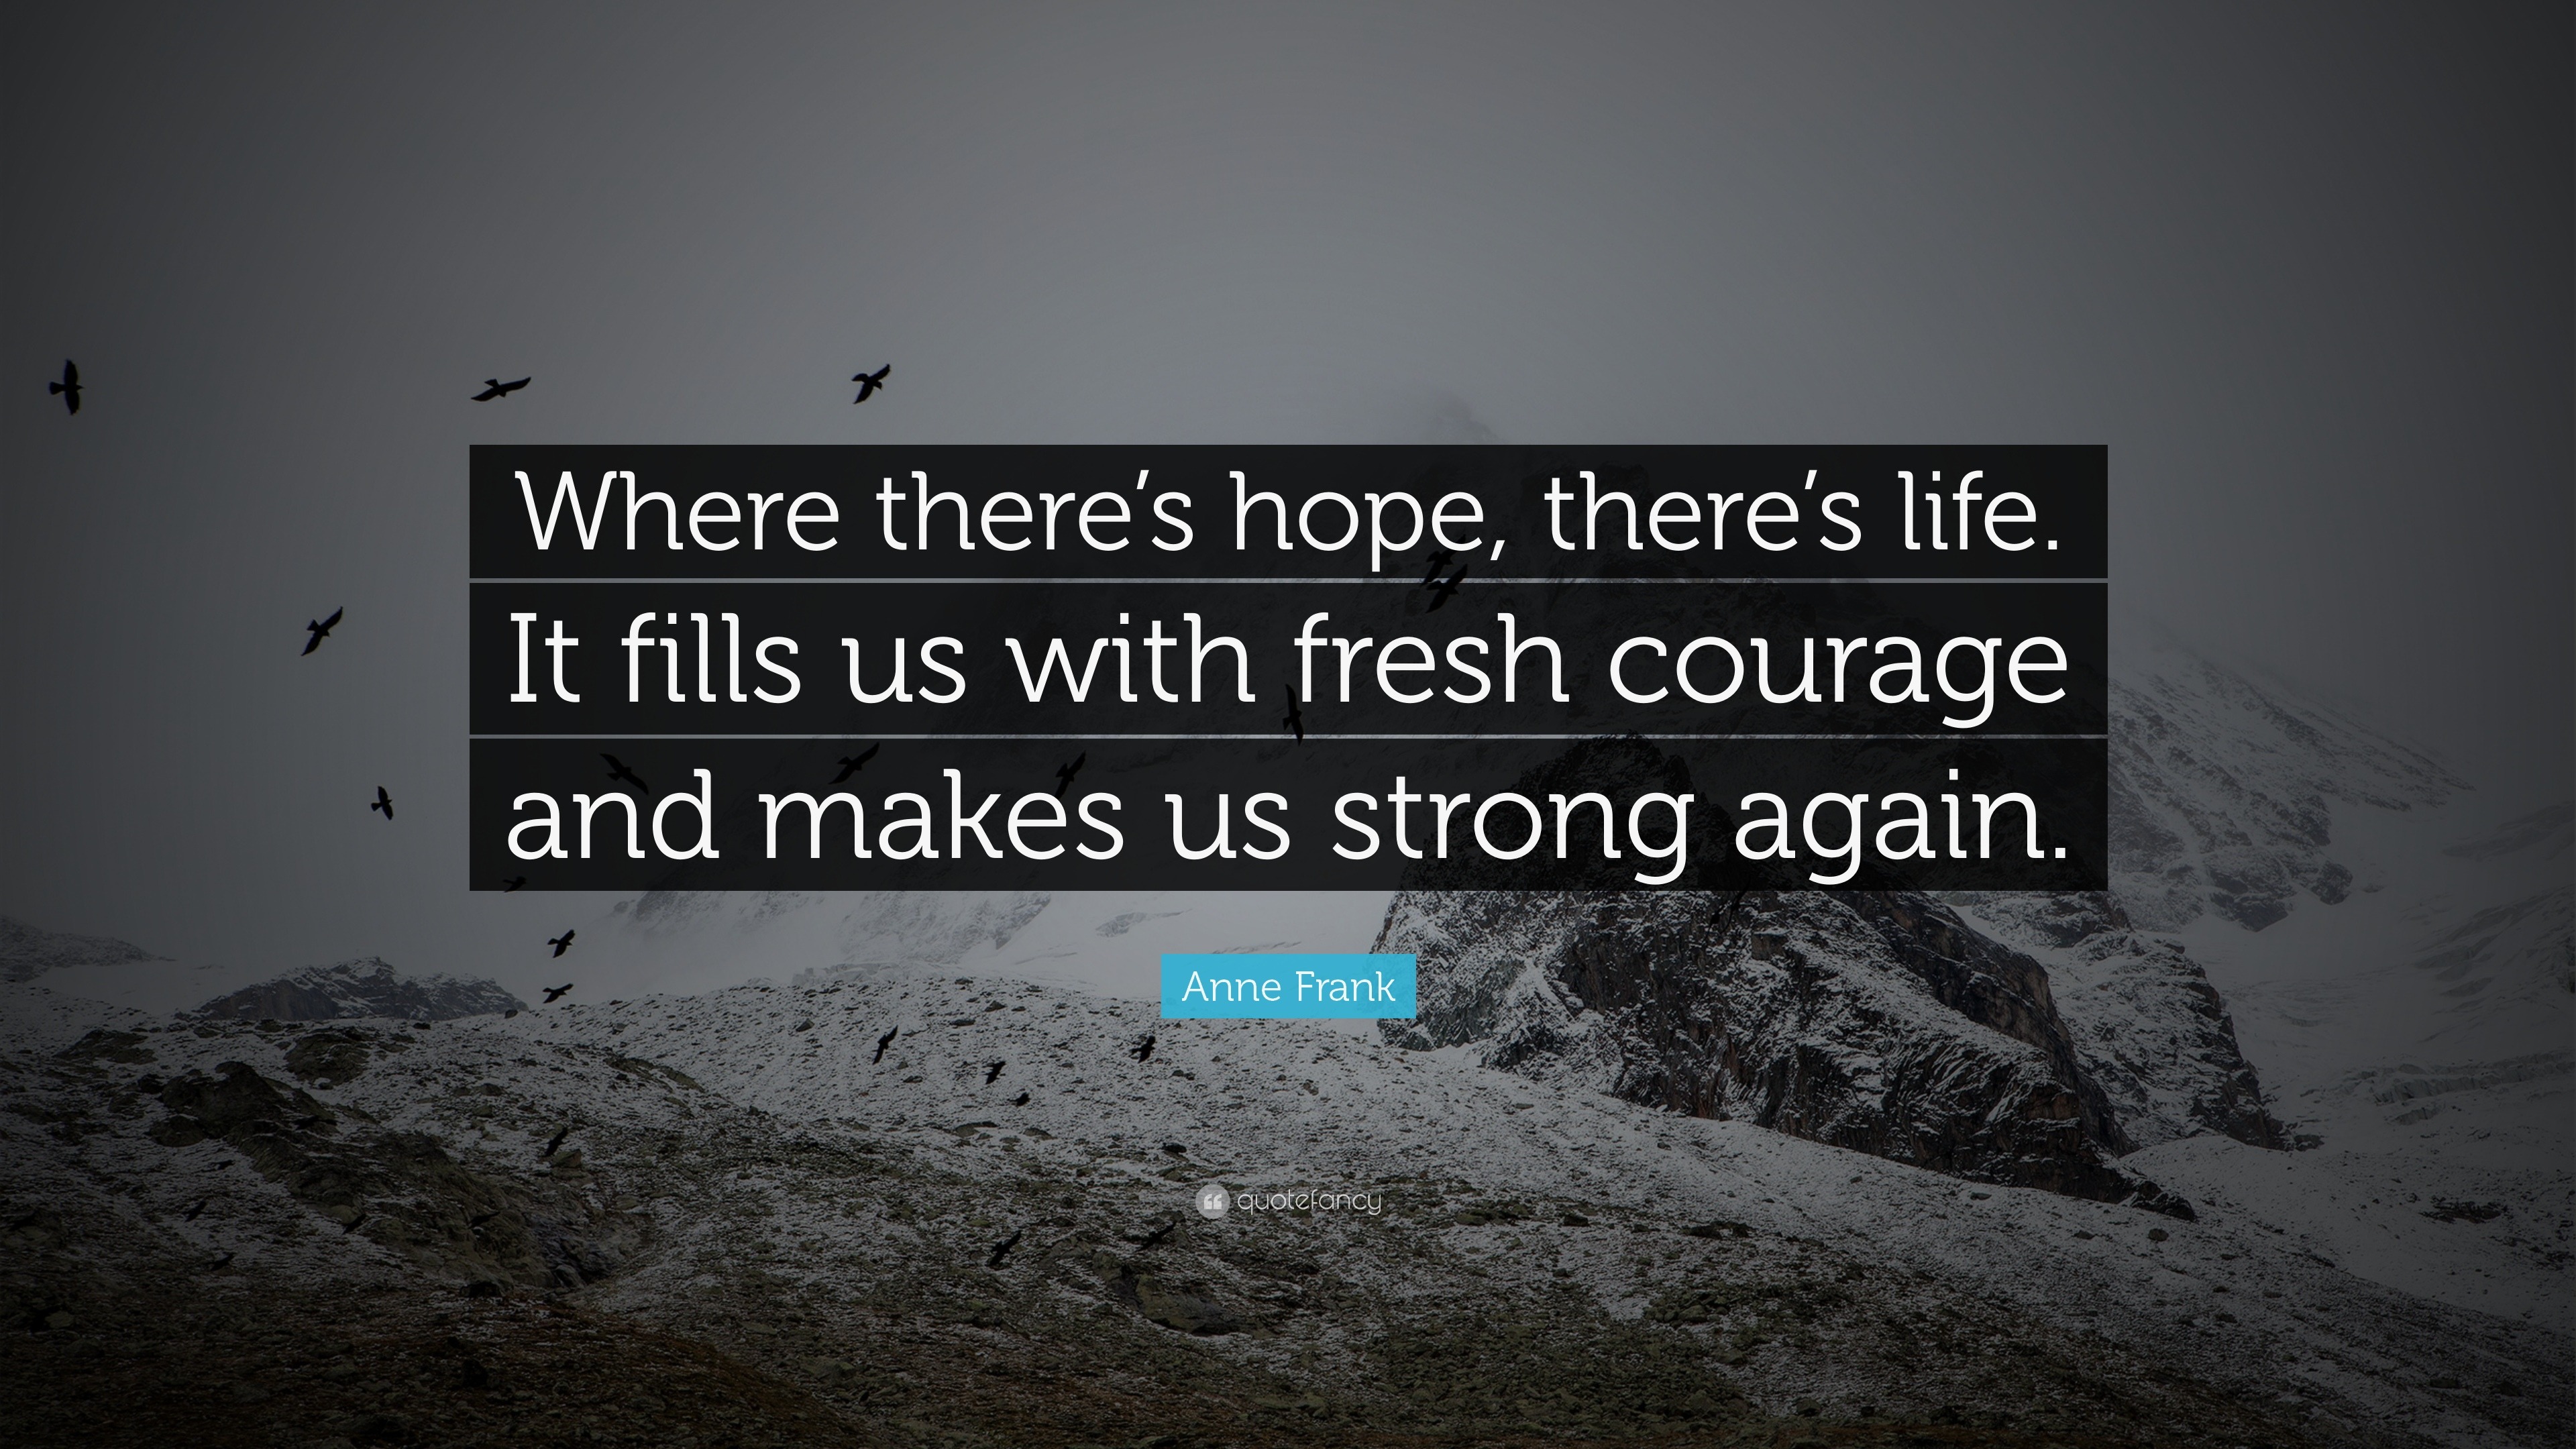 Anne Frank Quote: “Where there's hope, there's life. It fills us with fresh  courage and makes